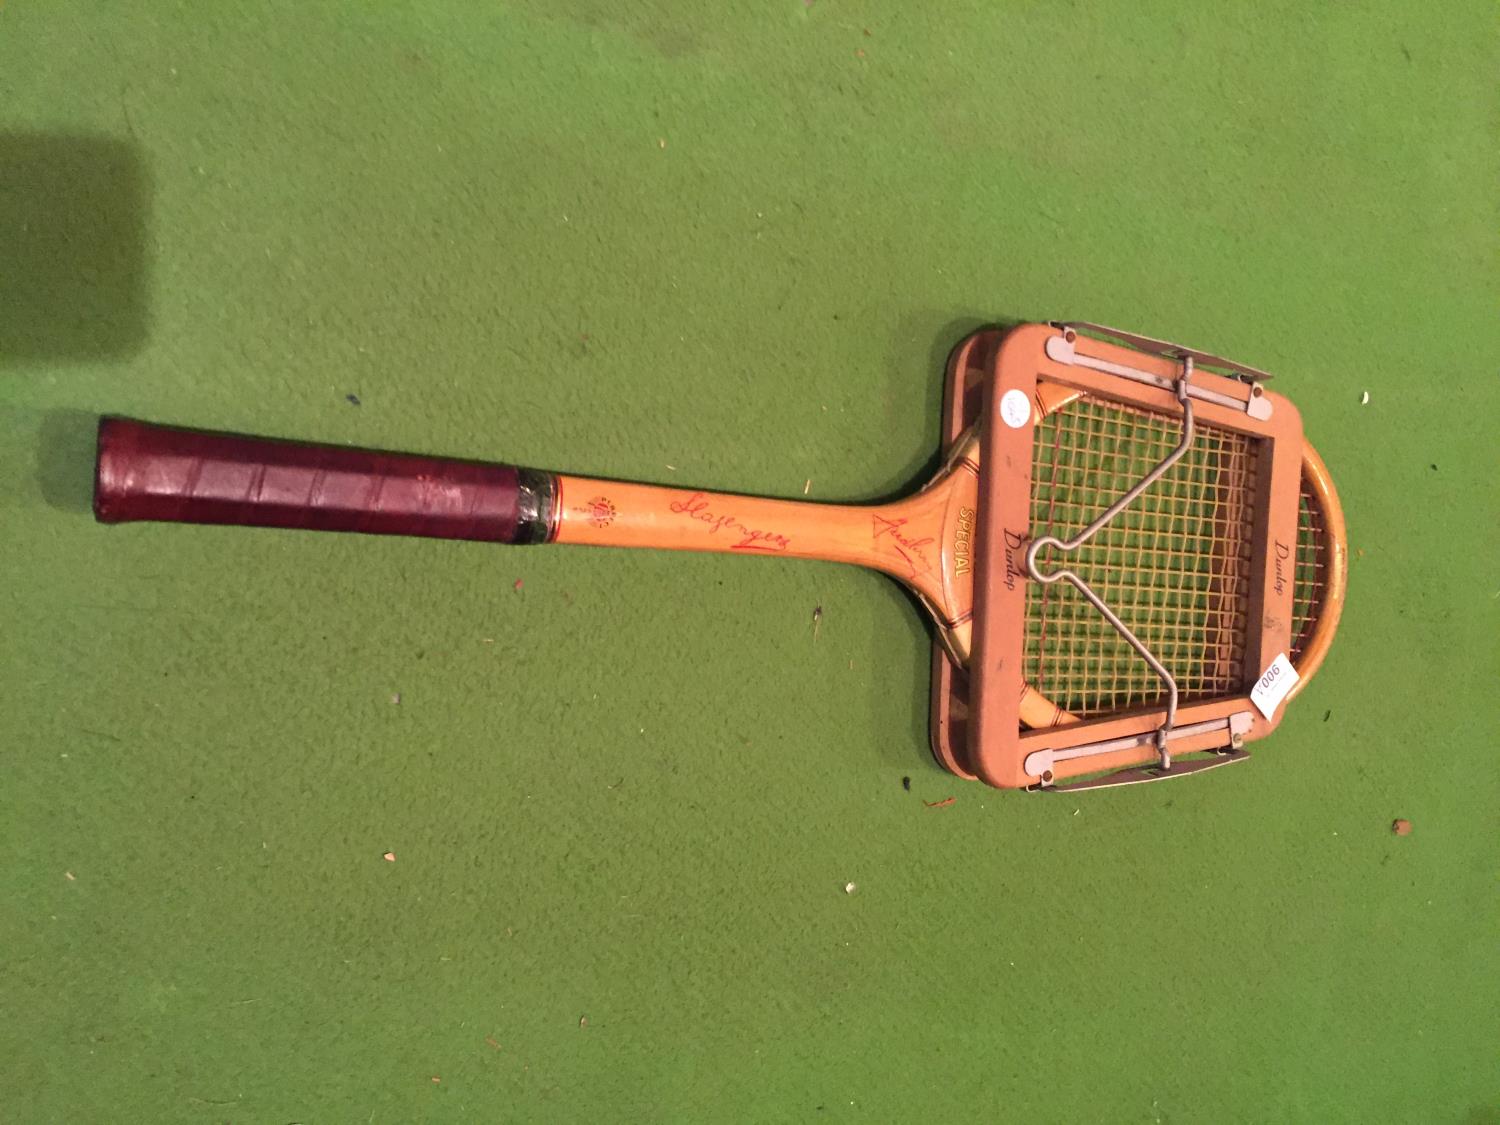 A VINTAGE SPECIAL FRED PERRY SLAZENGER PERFECT BALANCE TENNIS RACKET AND A DUNLOP RACKET STRING